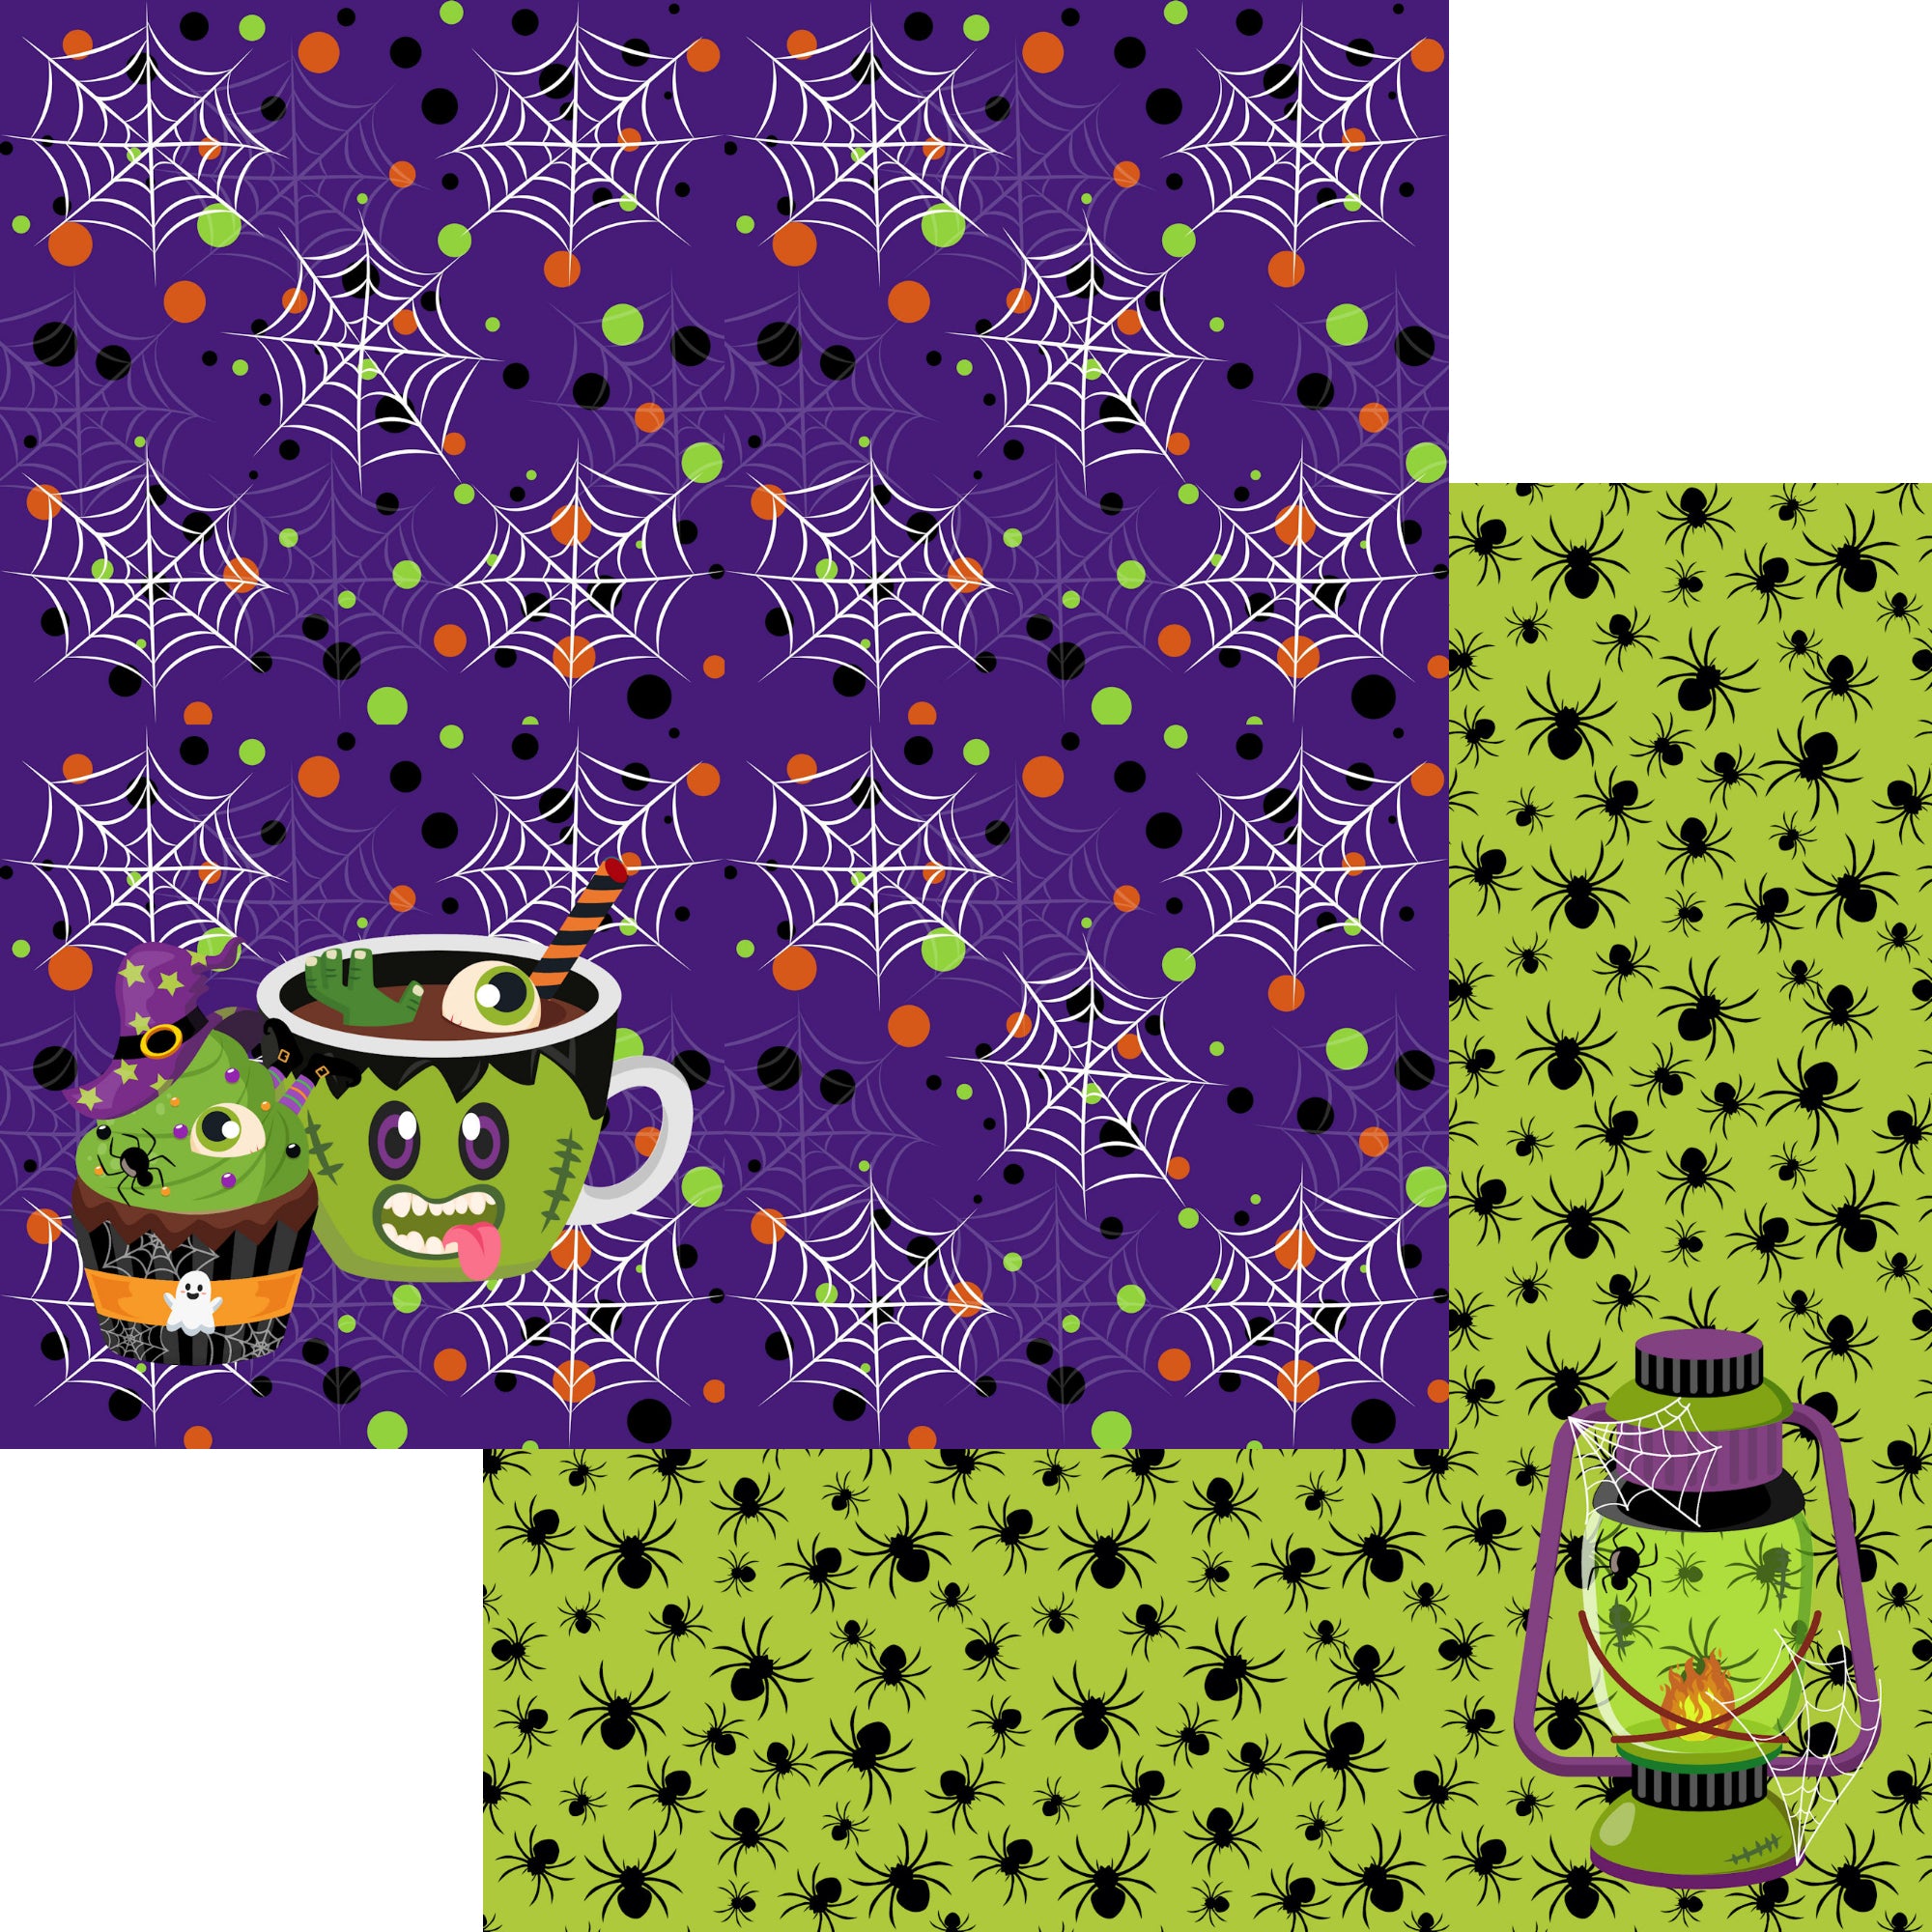 Happy Camp-o-ween 12 x 12 Scrapbook Paper & Embellishment Kit by SSC Designs